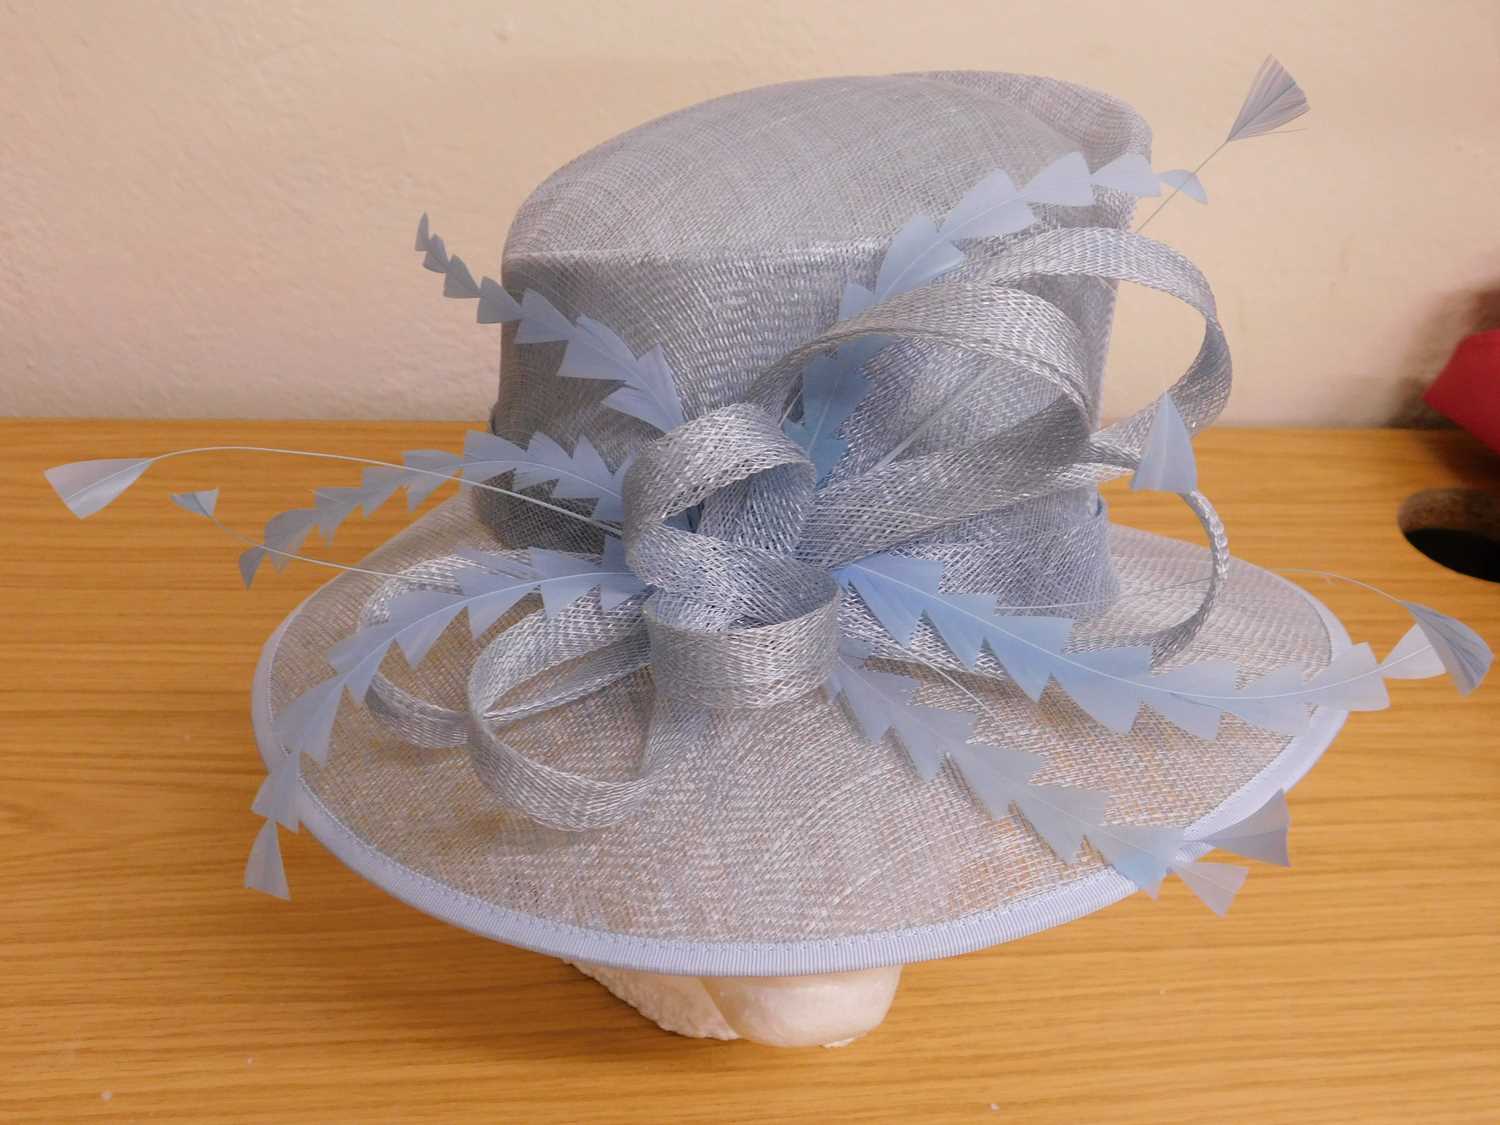 A Dusk straw hat in pale blue, 'Frieda' design bow and feather detail, new with tags - Image 3 of 3